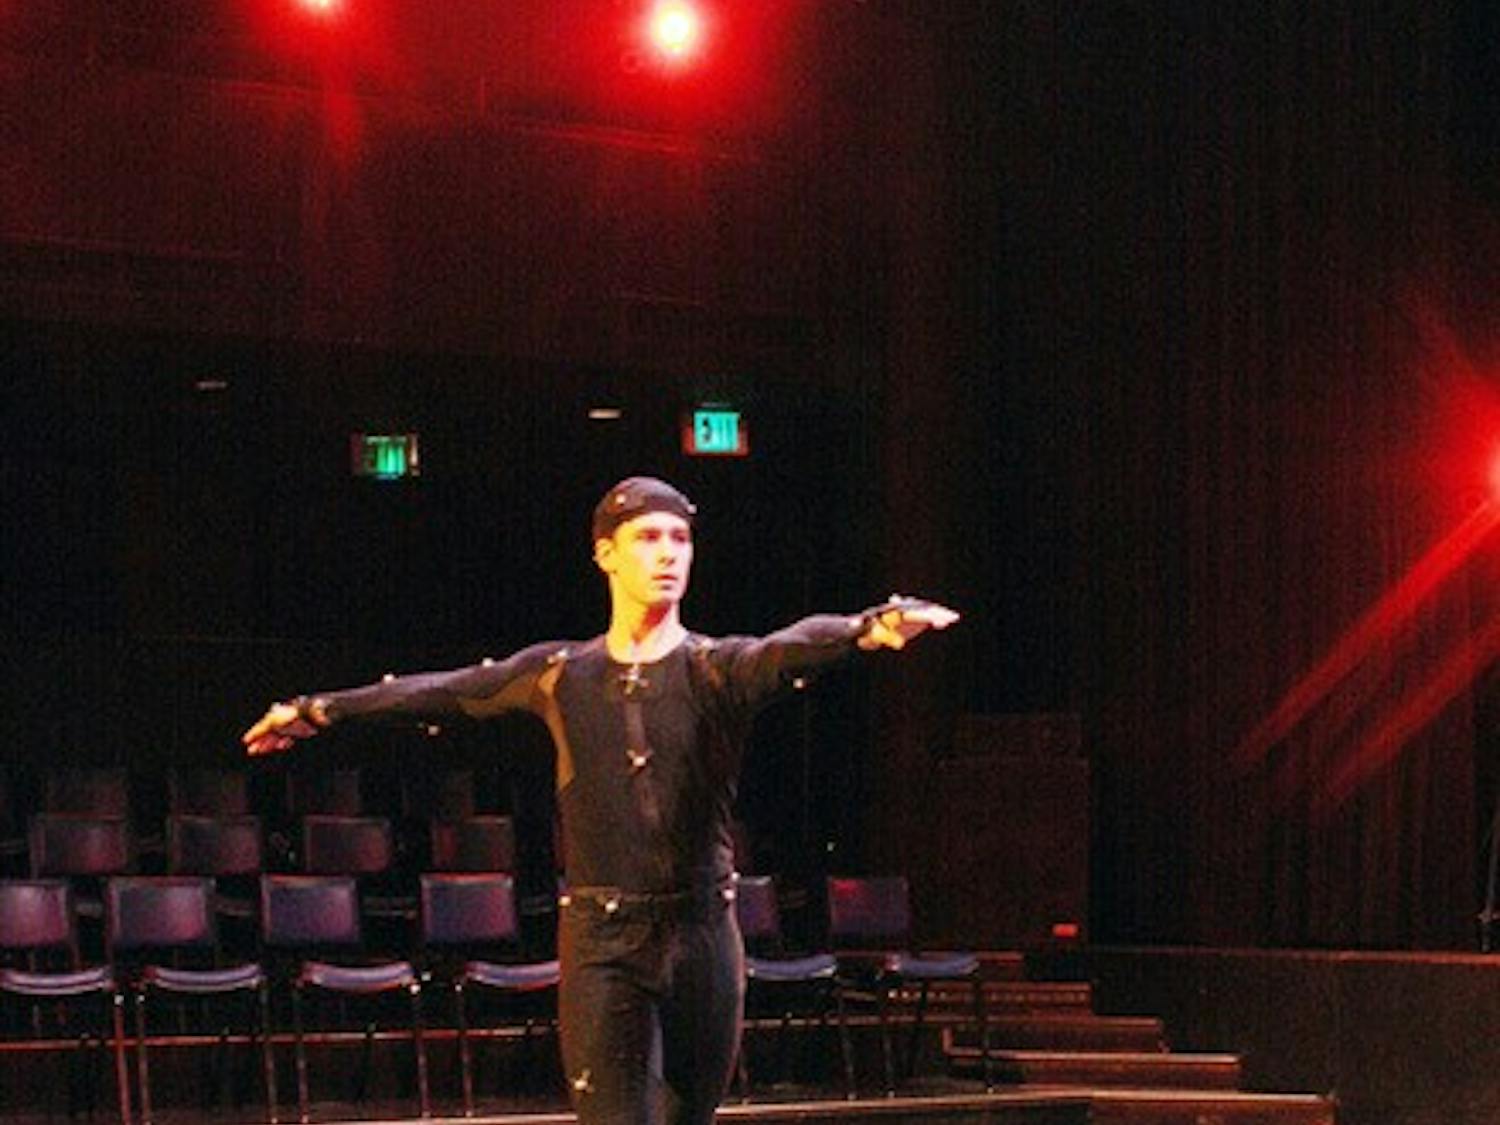 Cunningham's visit will climax with his lecture Wednesday night at 7 p.m. inthe Moore Theater and his troupe's performances on Friday and Saturday.